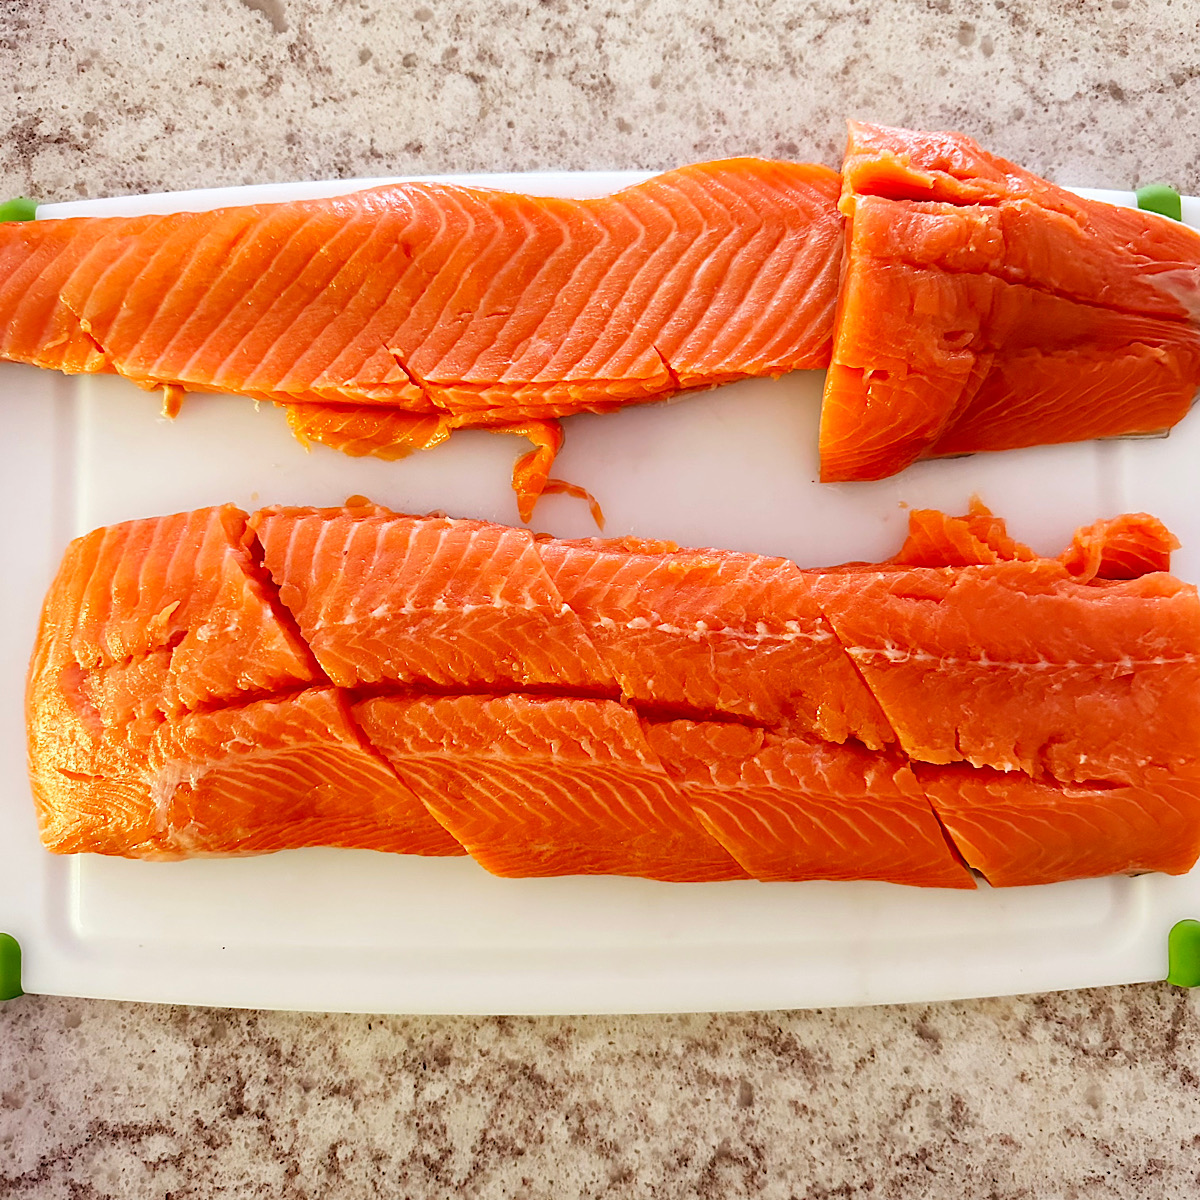 Salmon cut into several filets on a white cutting board.